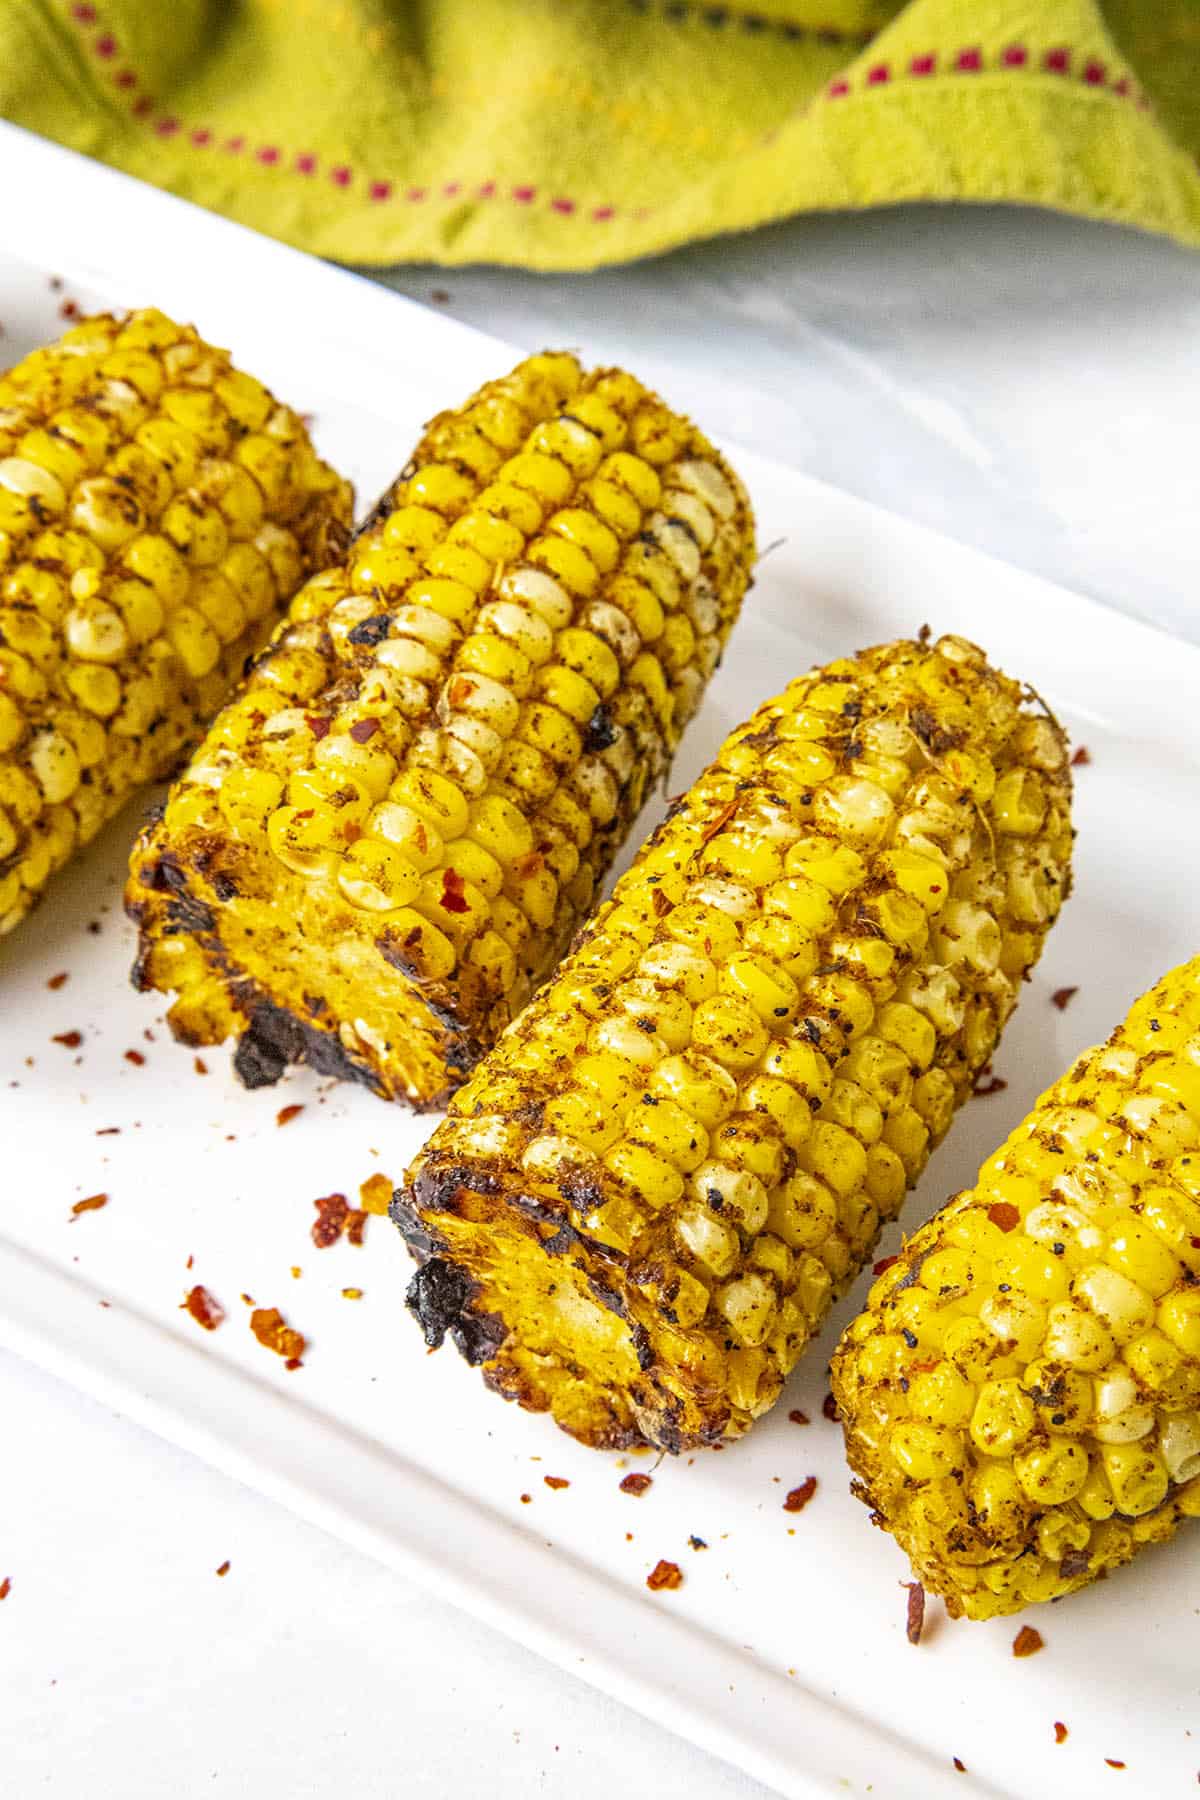 Jerk Rubbed Grilled Corn On The Cob Chili Pepper Madness,Moroccan Mint Tea Set